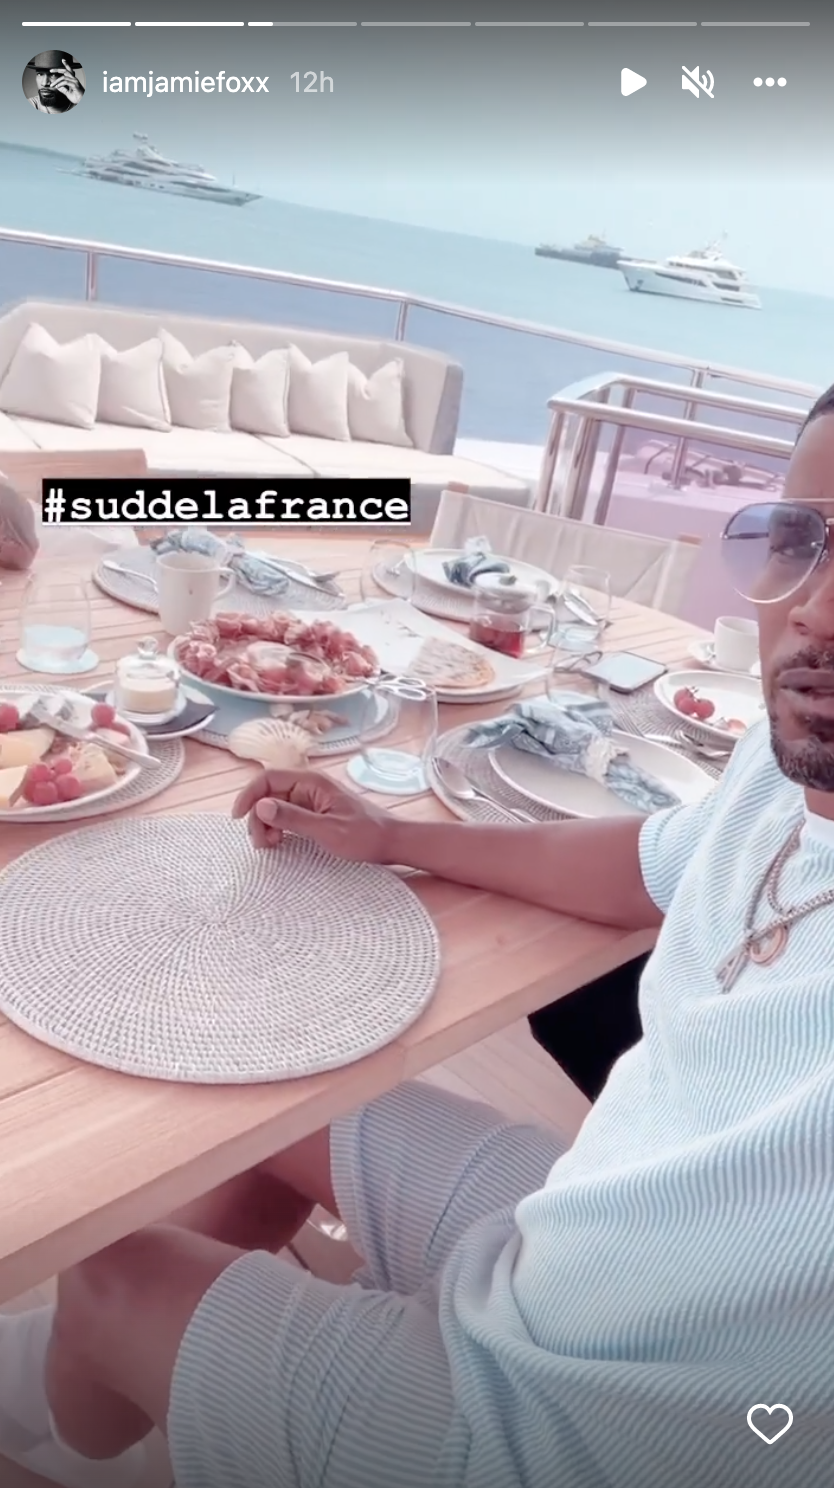 Jamie Foxx shares his vacation in the south of France